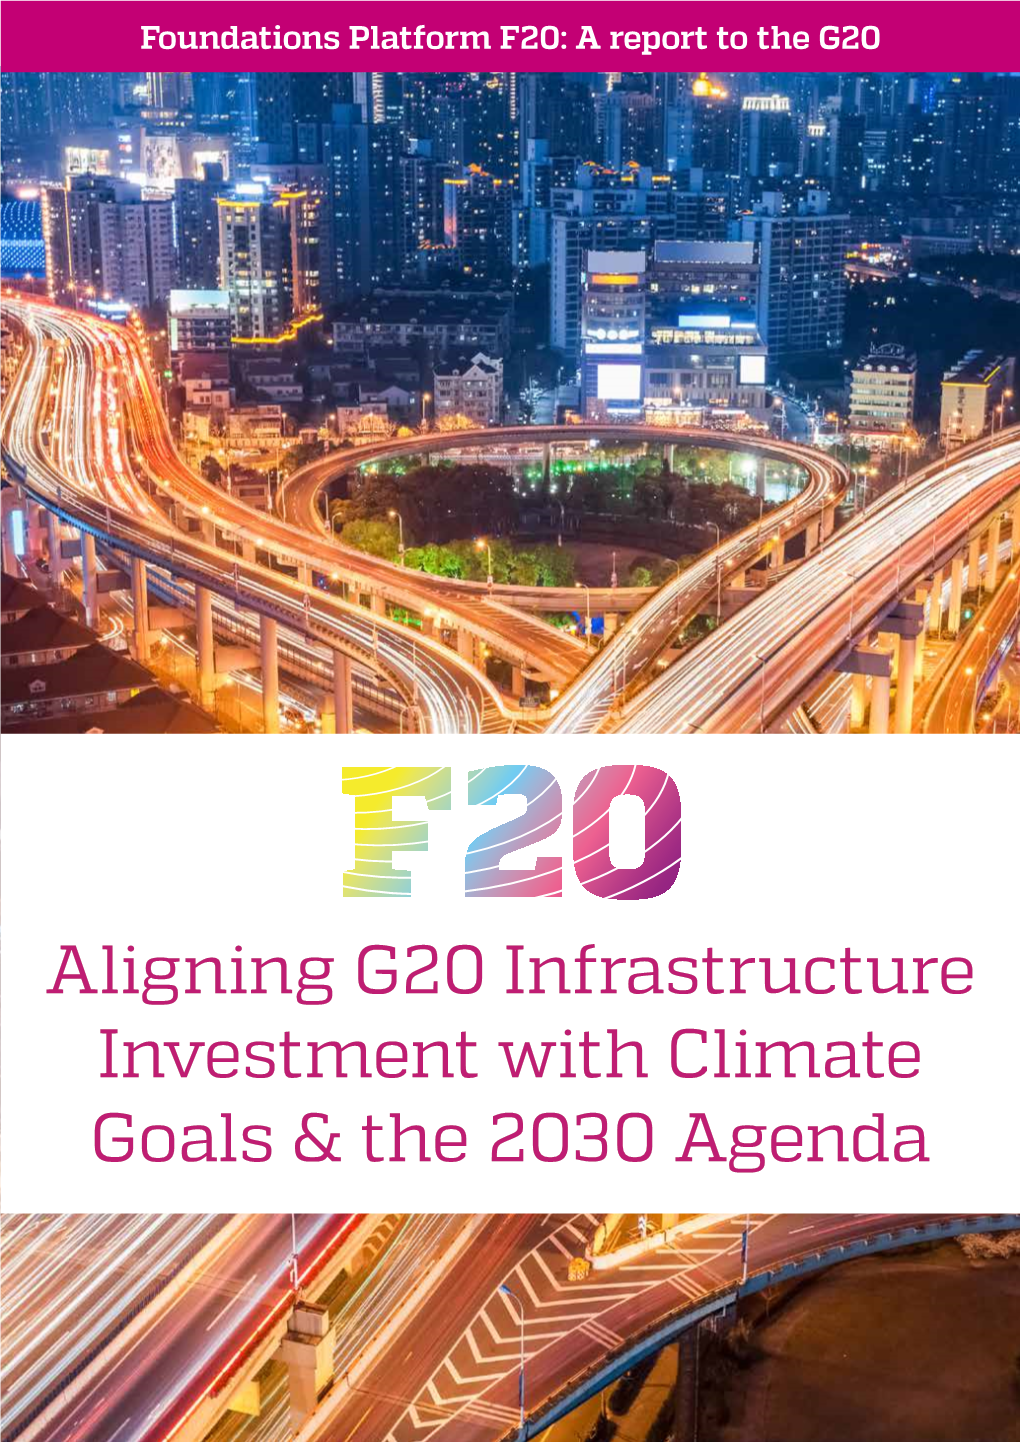 Aligning G20 Infrastructure Investment with Climate Goals & the 2030 Agenda